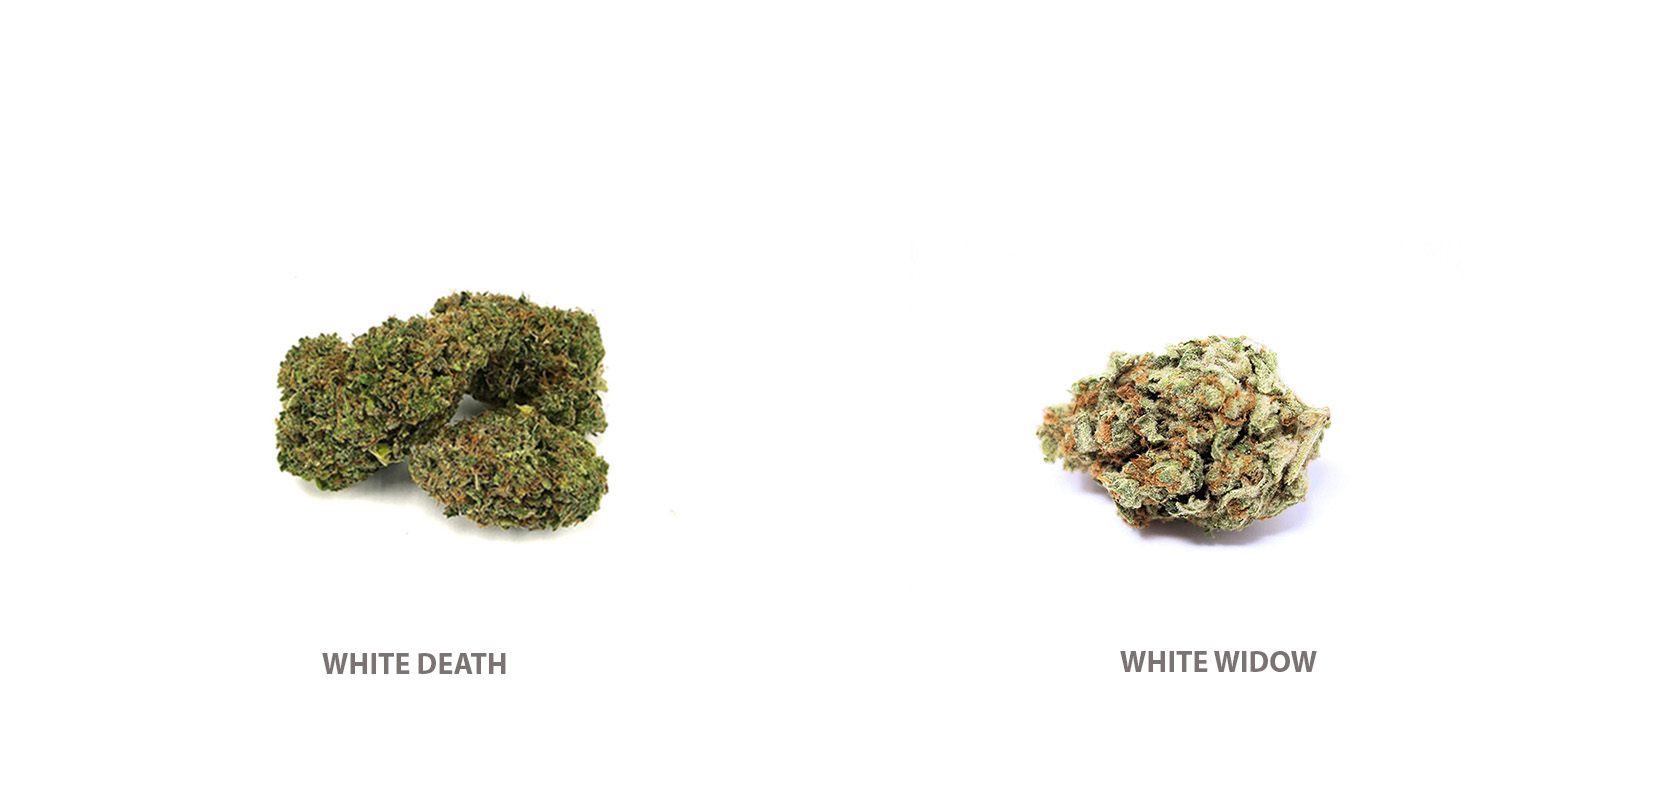 White widow and white death budget buds from Low Price Bud weed dispensary for BC cannabis and mail order marijuana. buy weed canada. mail order cannabis canada. concentrates canada. Dispencary.